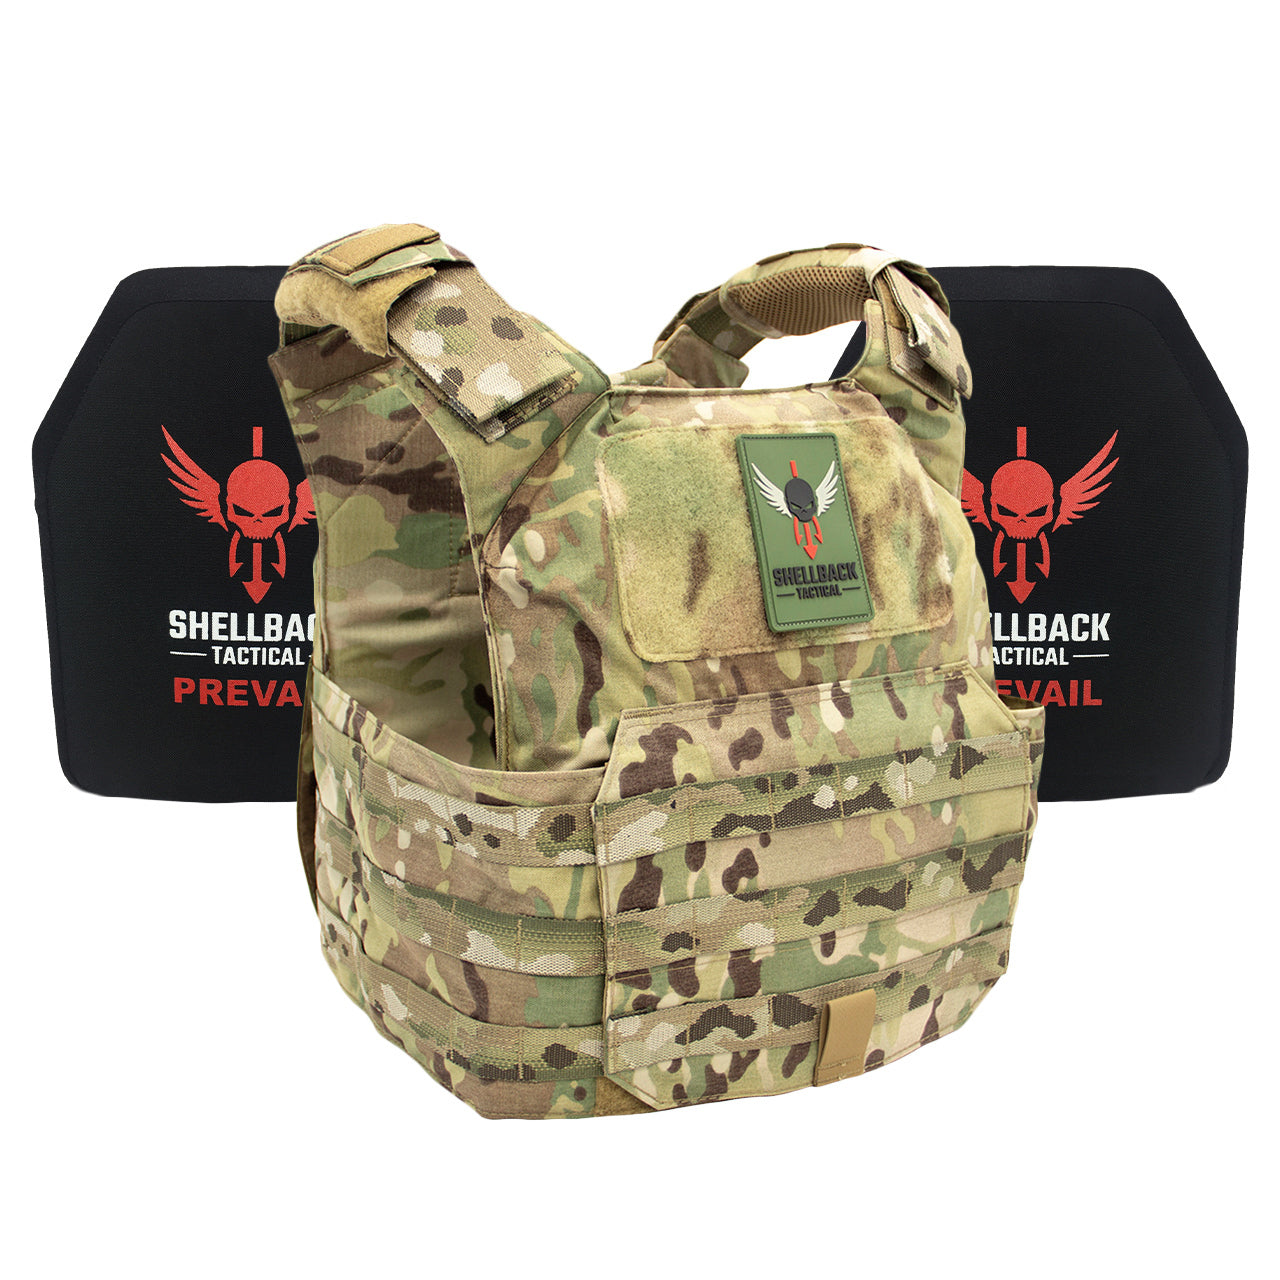 A Shellback Tactical Patriot Active Shooter Kit with Level IV Model 1155 Armor Plates Ranger Green plate carrier.